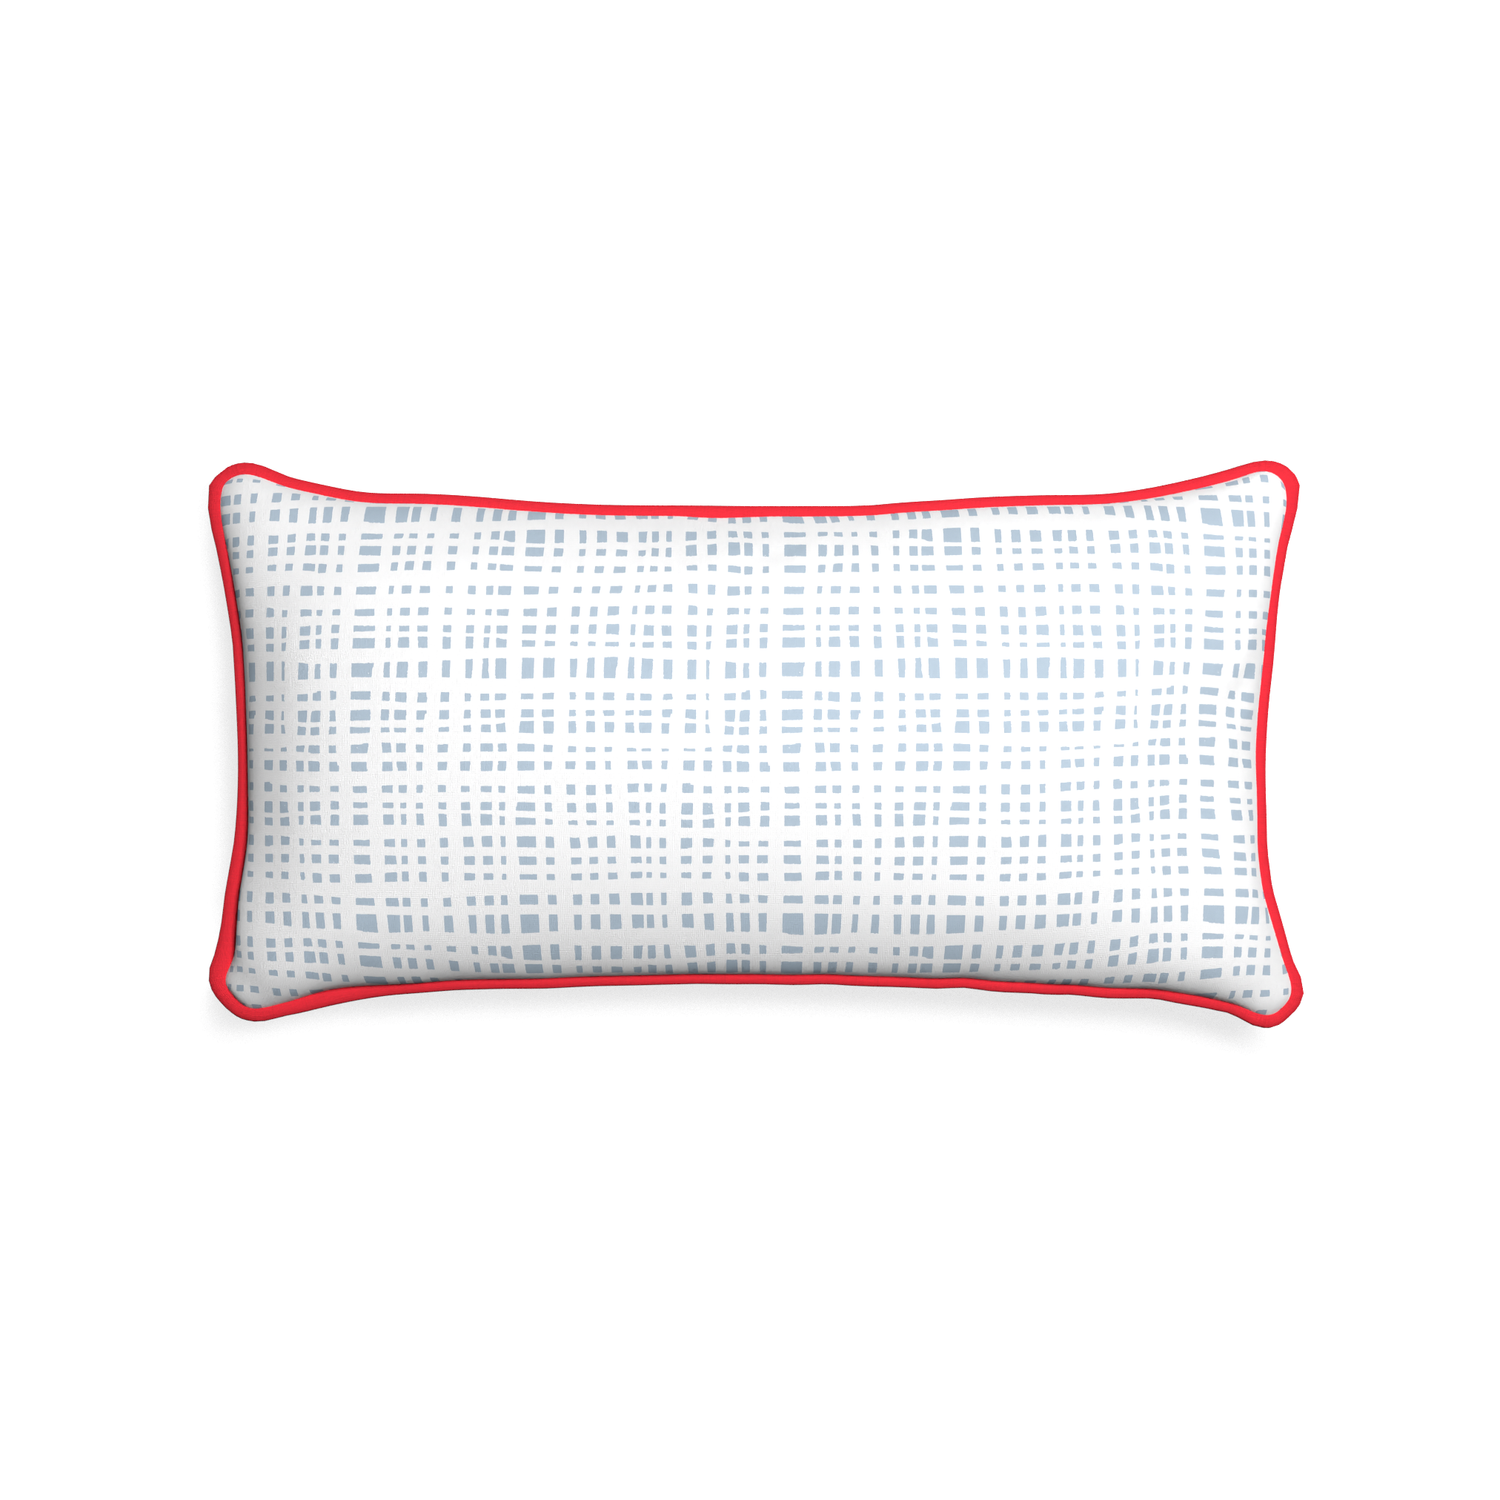 Midi-lumbar ginger custom plaid sky bluepillow with cherry piping on white background